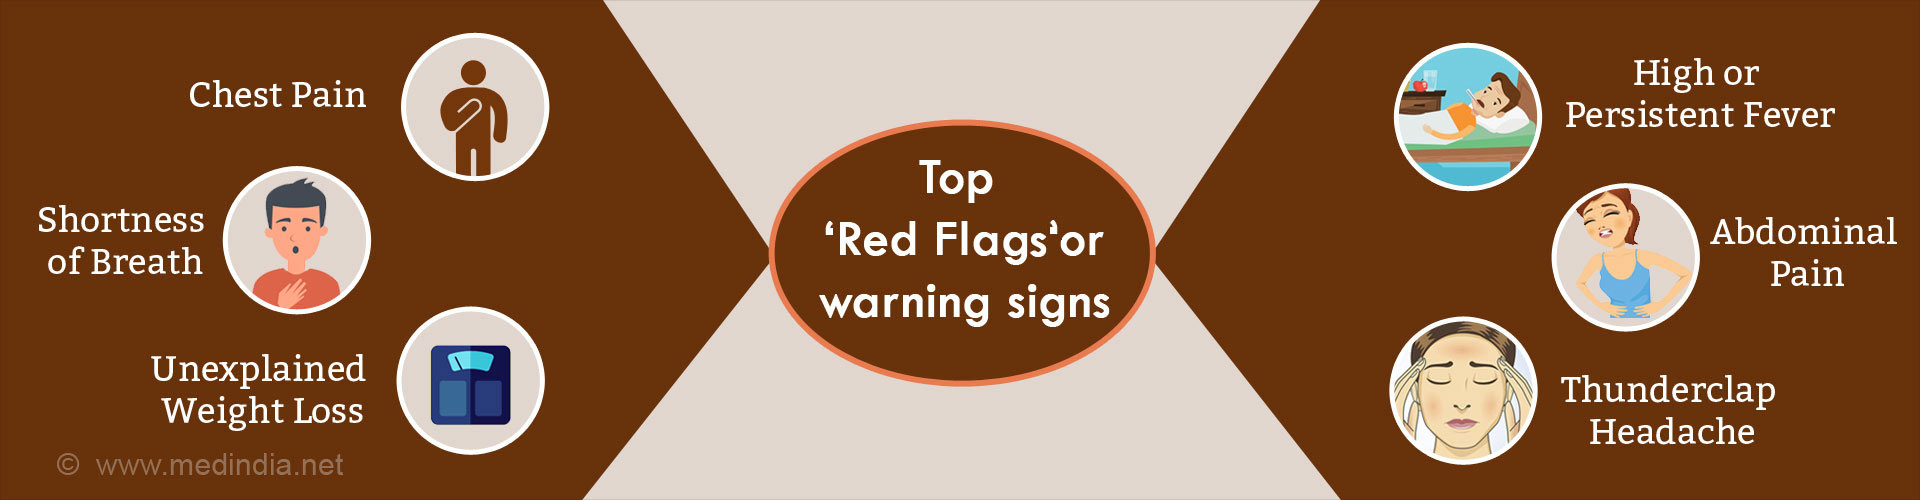 Top Red Flags or Warning Signs - chest pain, shortness of breath, unexplained weight loss, high or persistent fever, abdominal pain, thunderclap headache